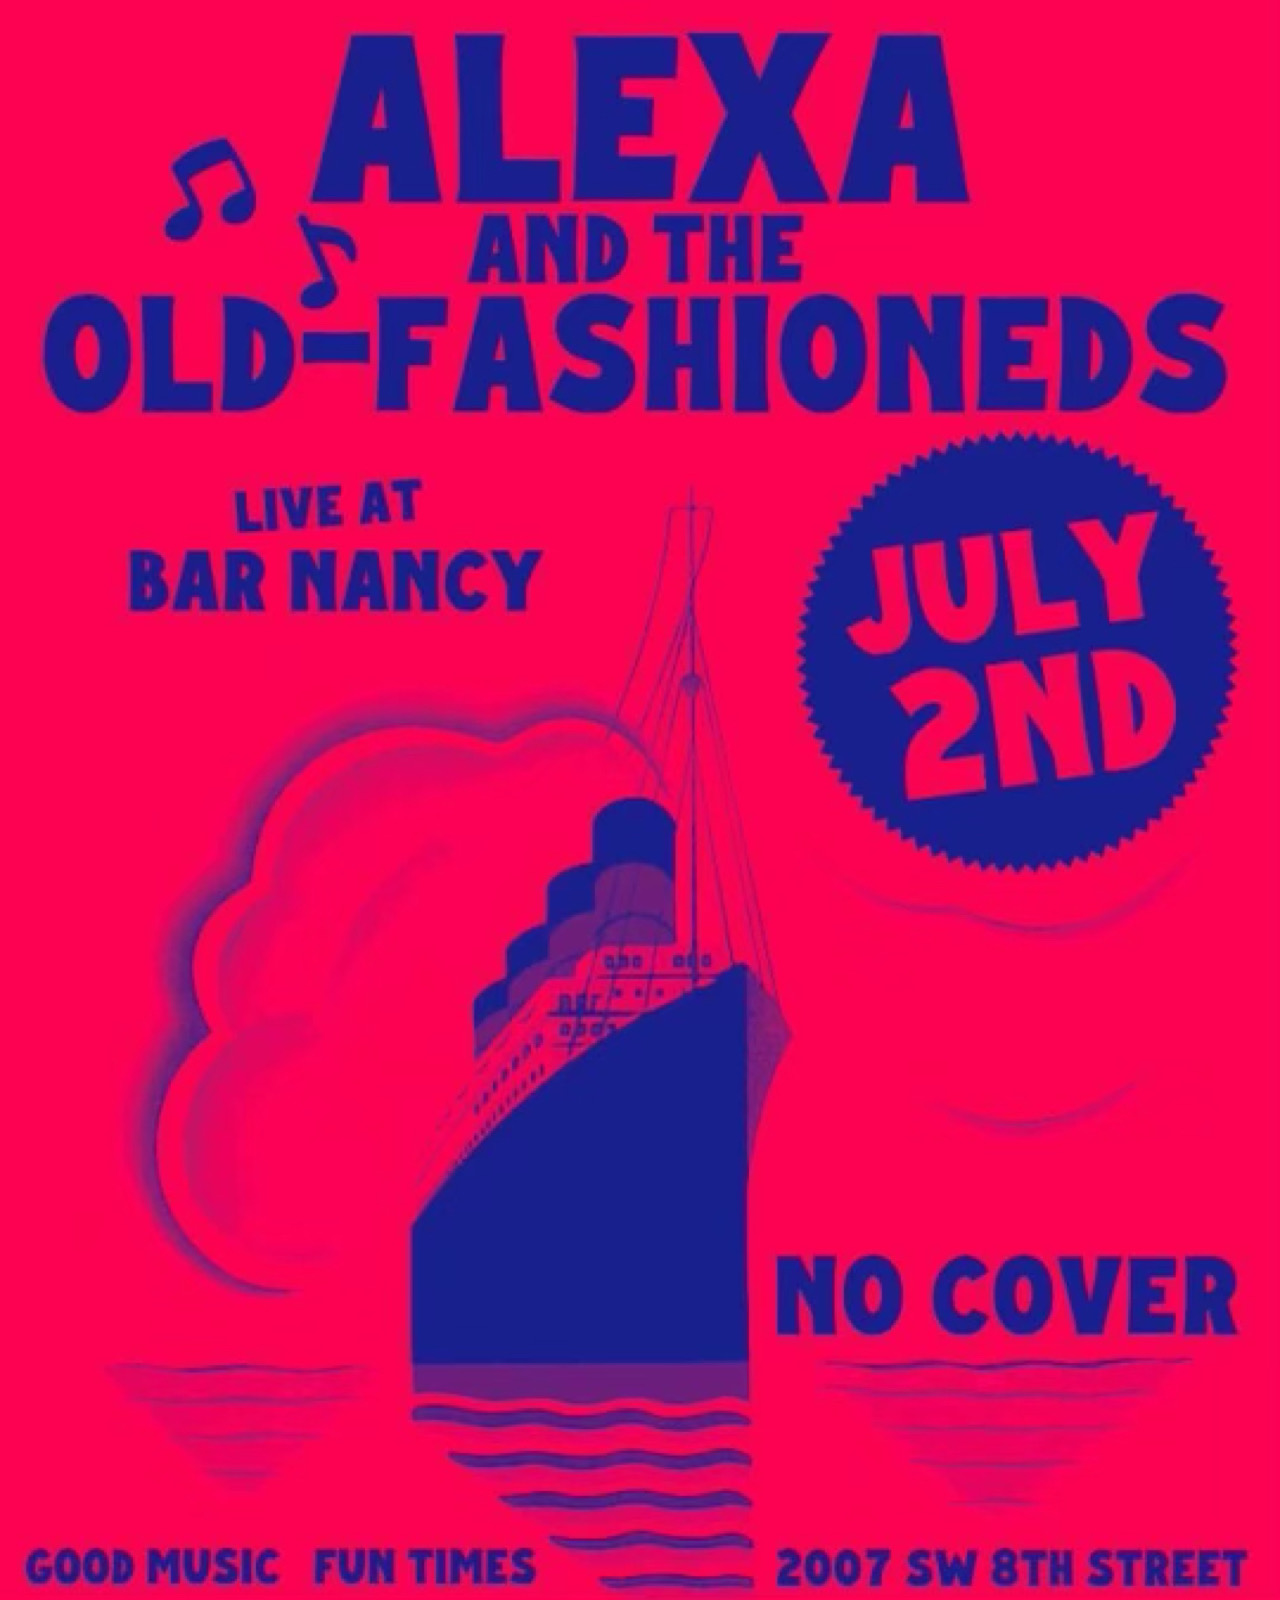 Alexa and The Old-Fashioneds at Bar Nancy July 2nd